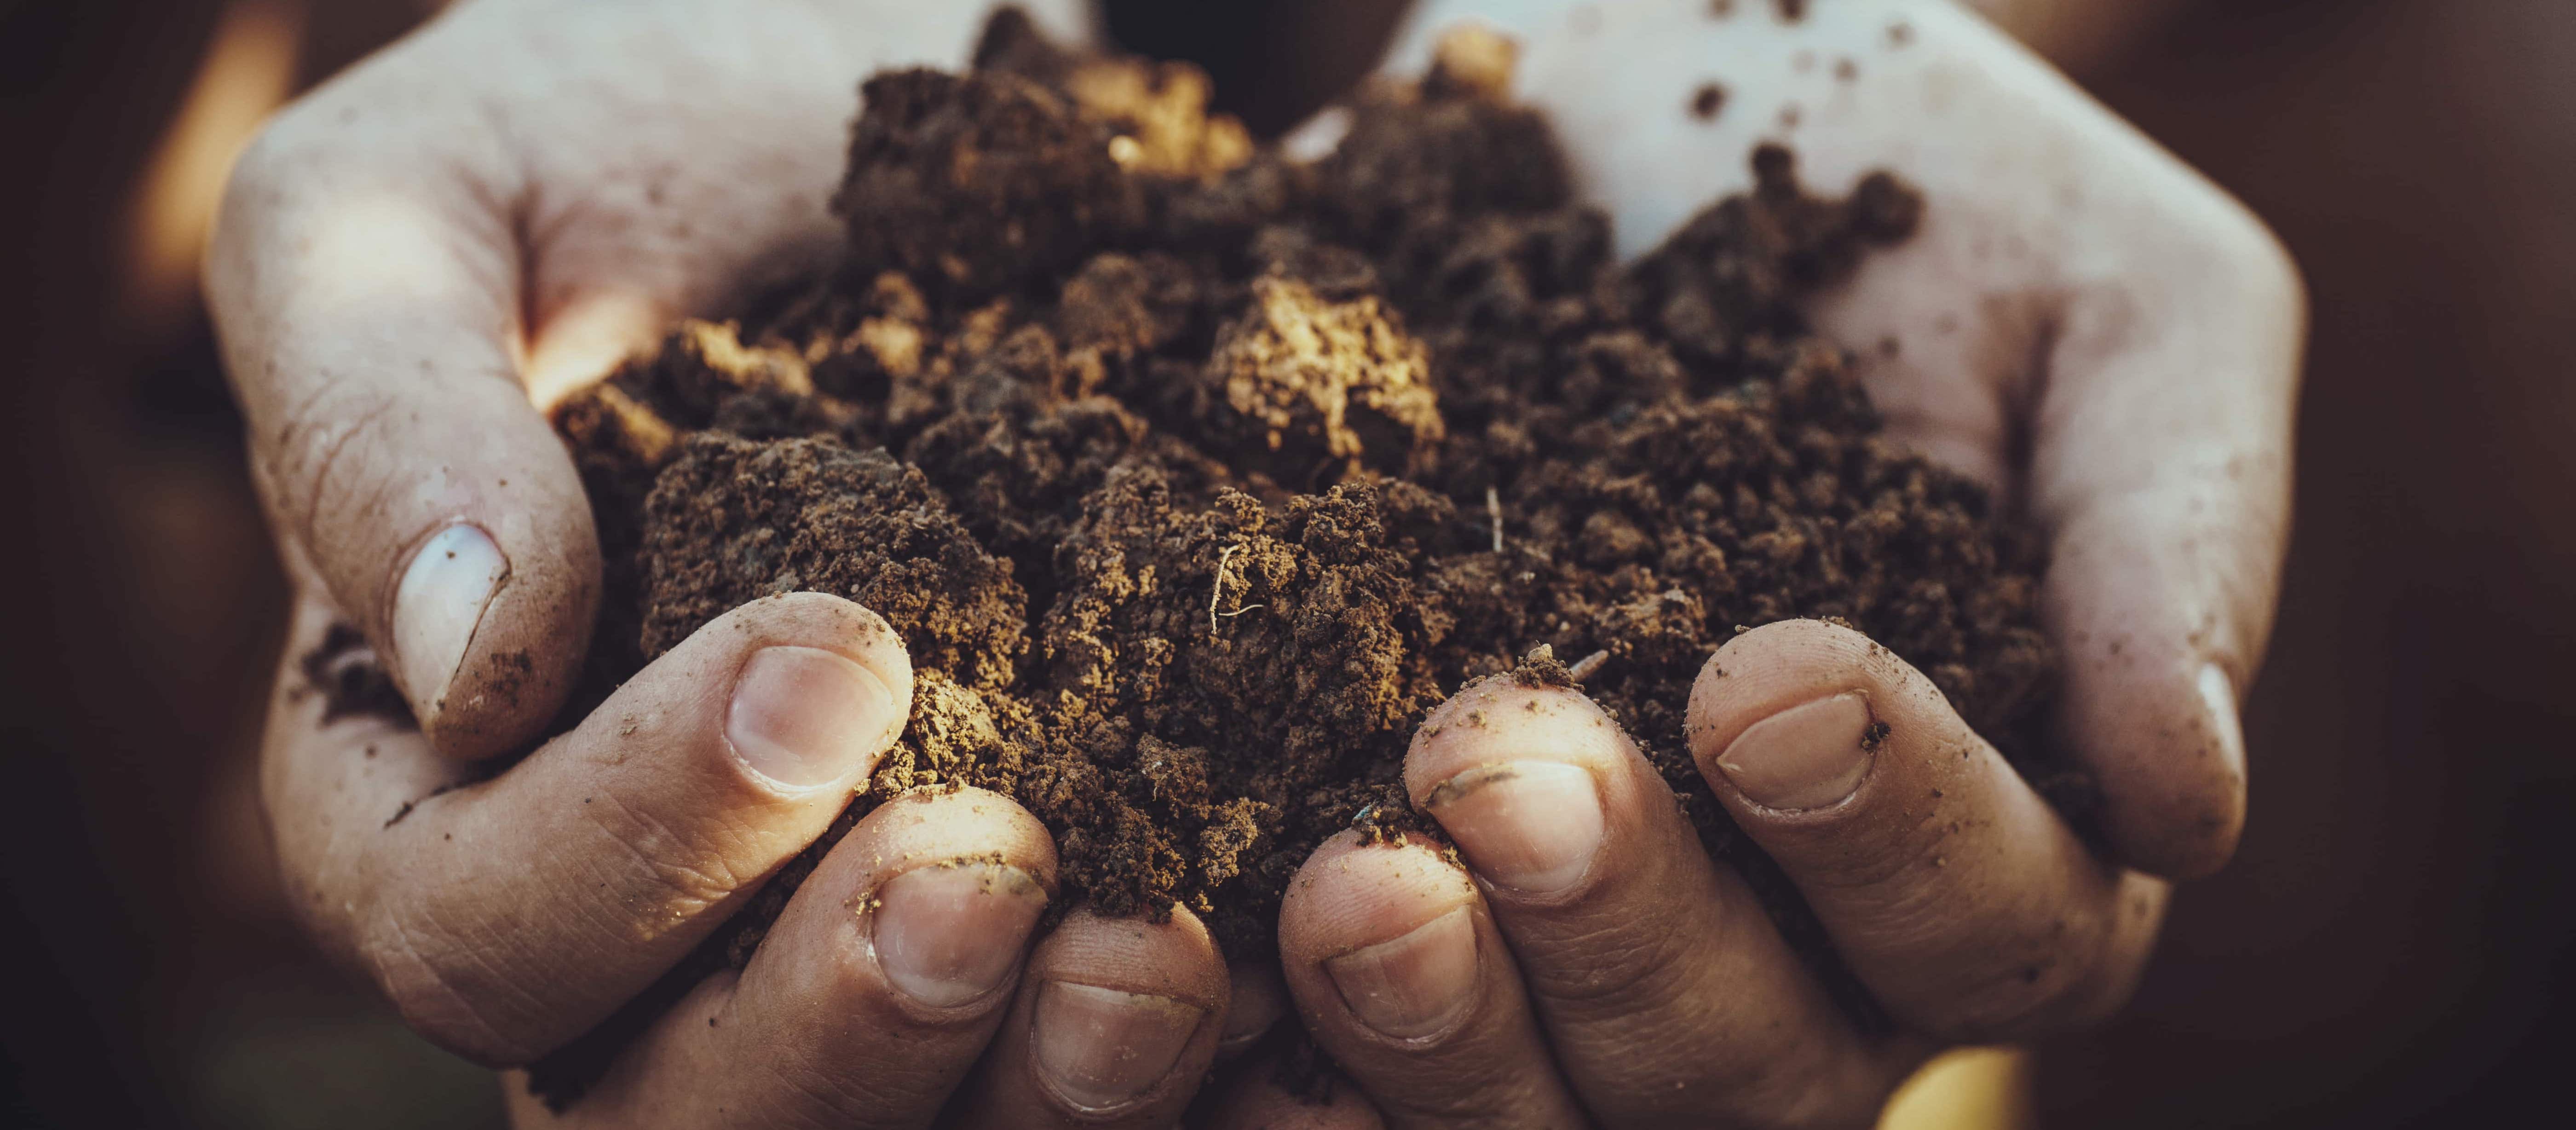 Photo of hands caring for soil